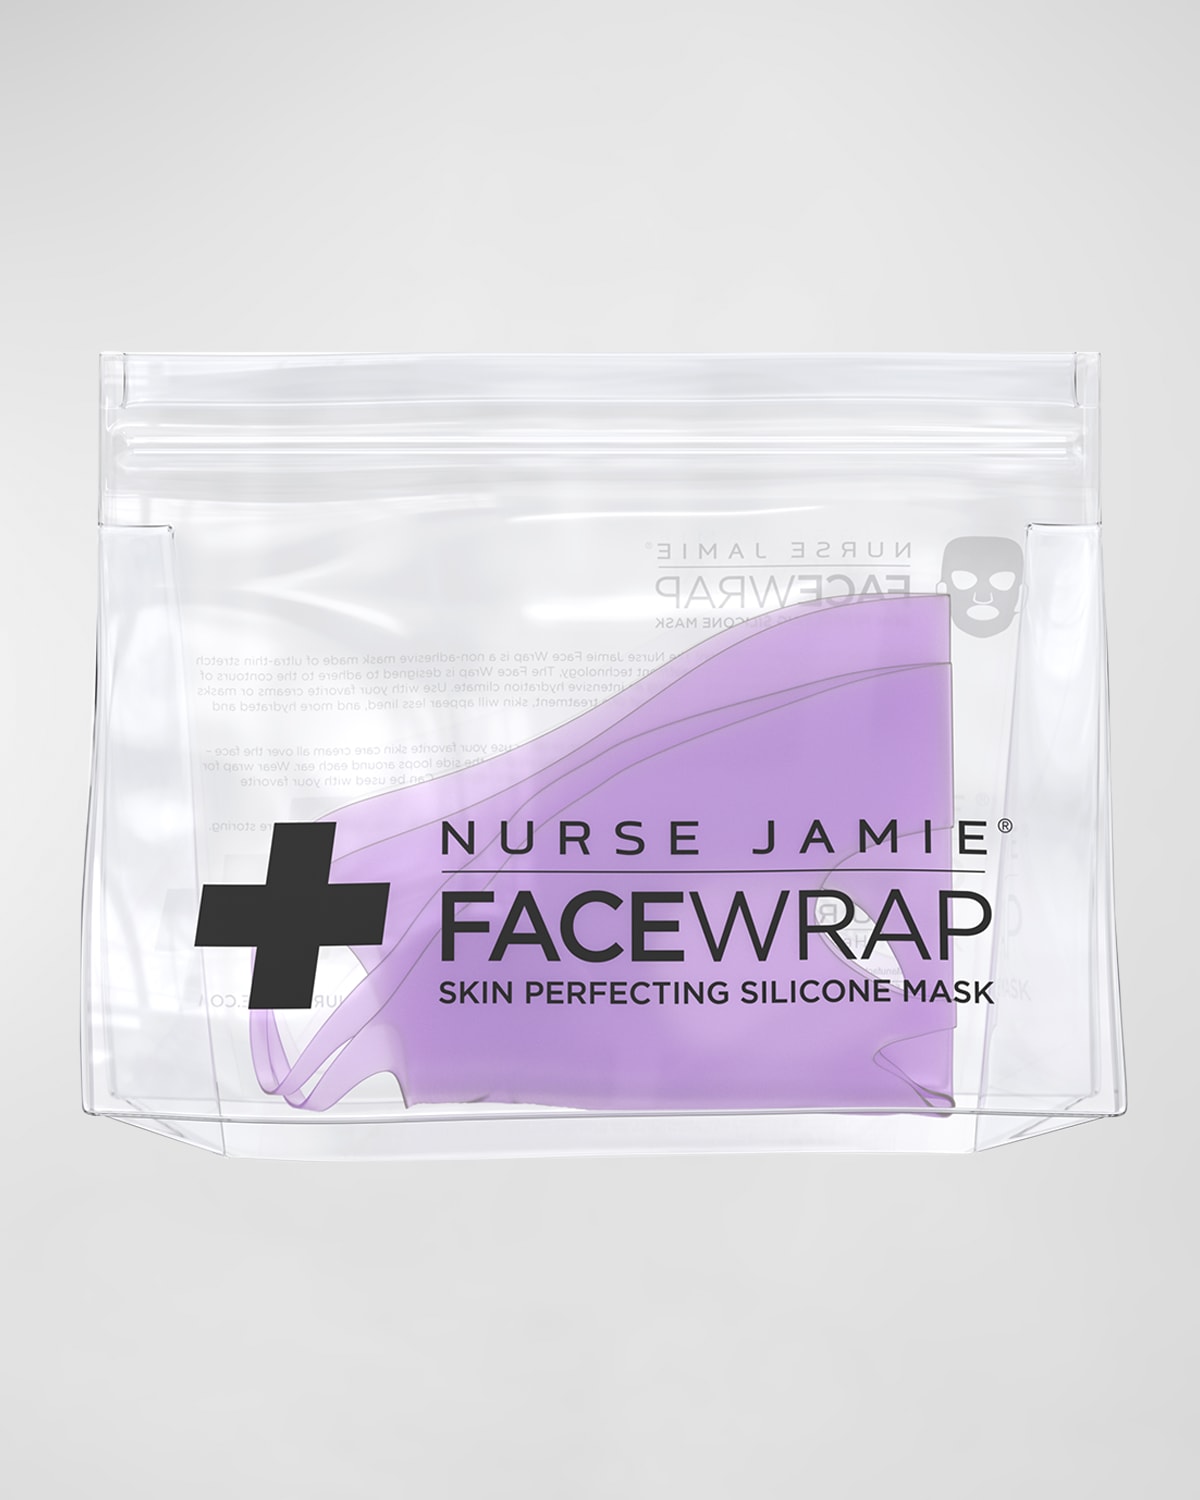 Face Wrap Skin Perfecting Silicone Mask